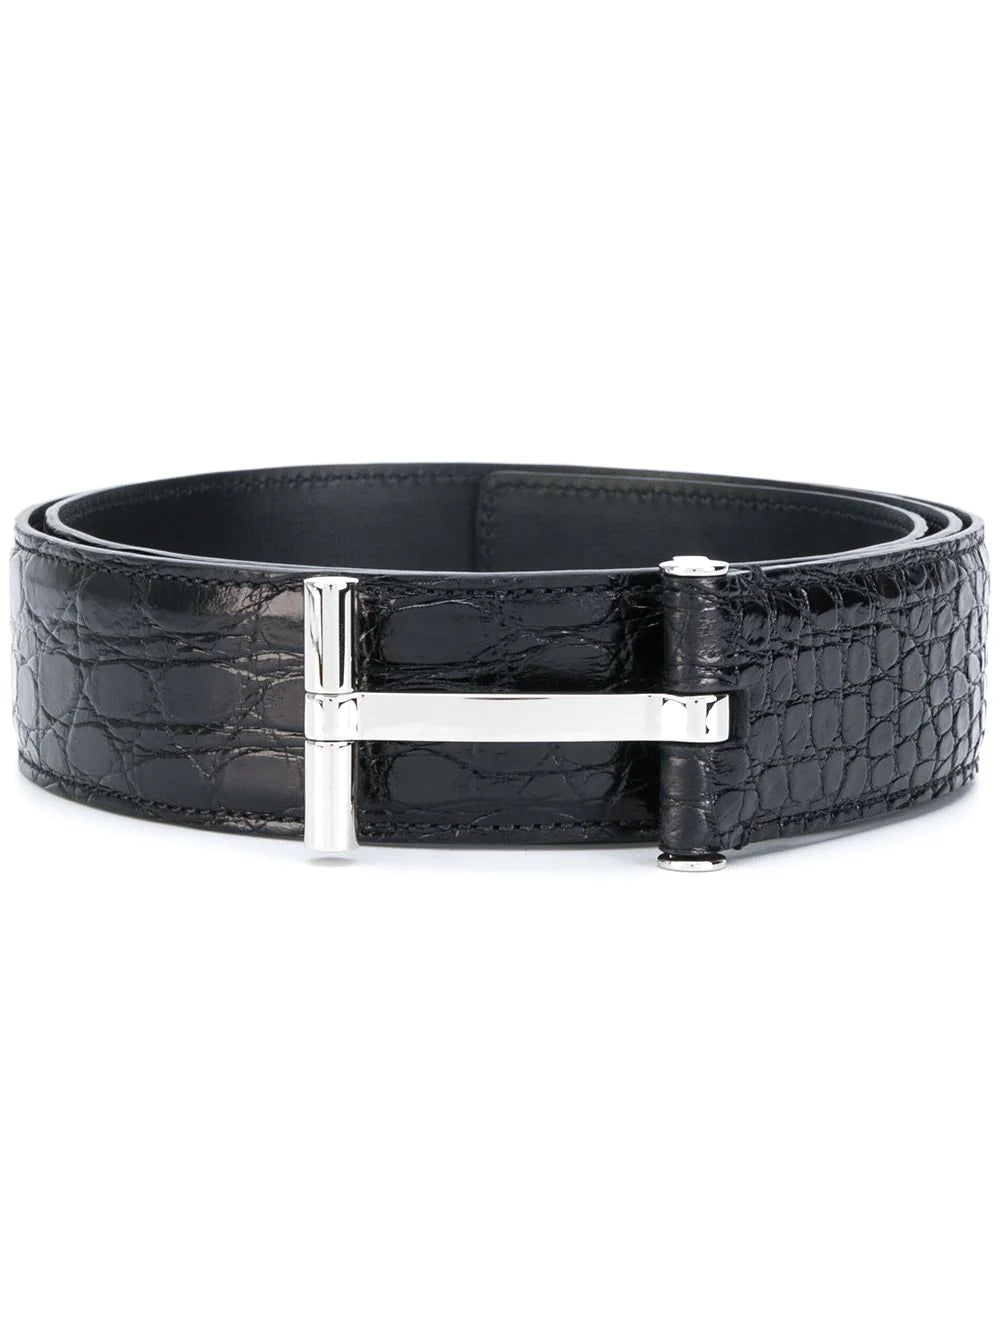 TOM FORD T Buckle Belt